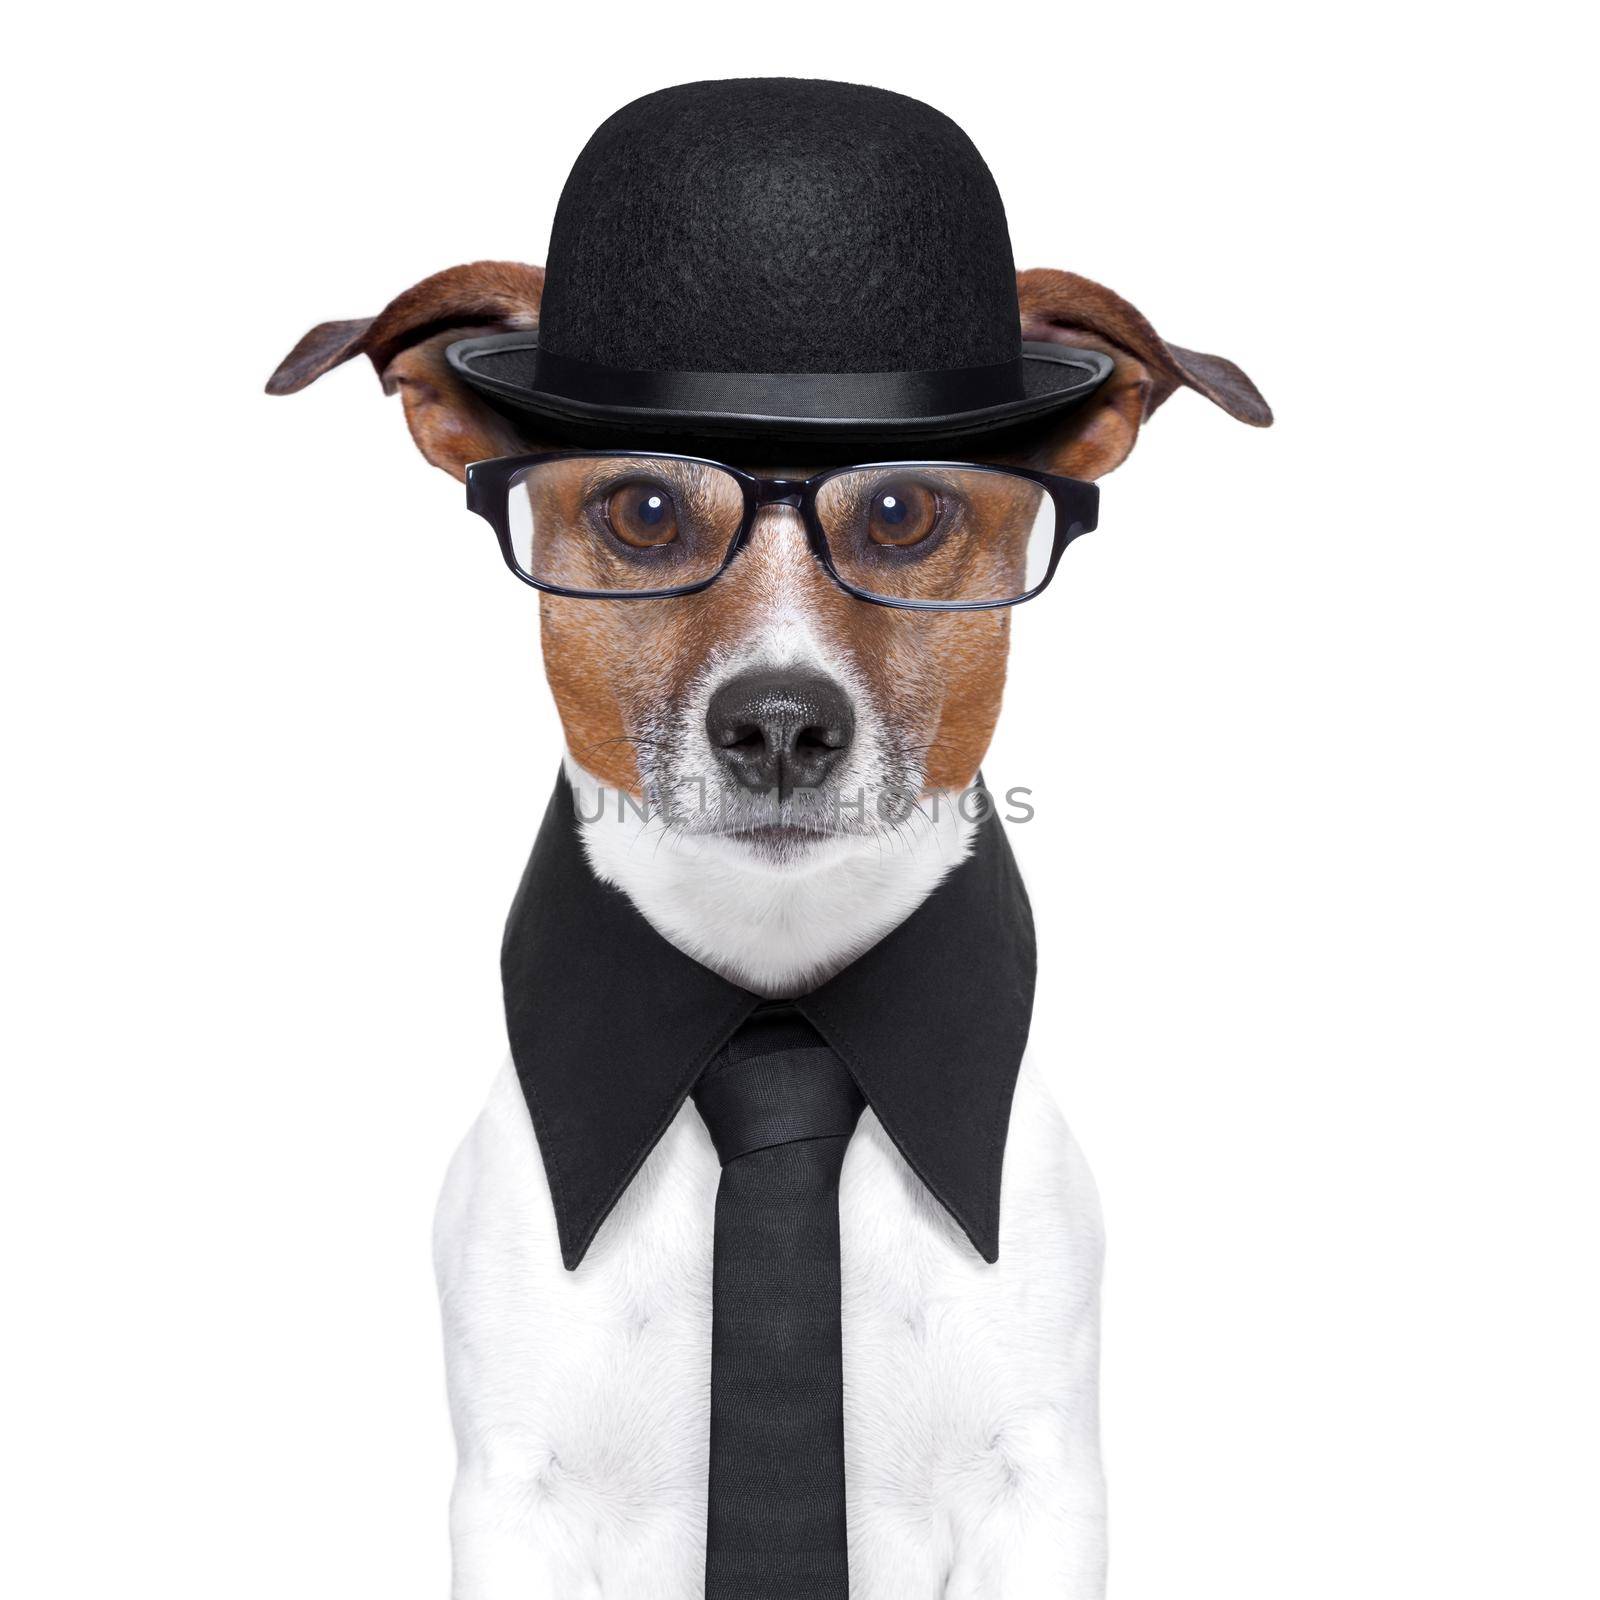 british dog with black bowler hat and black suit